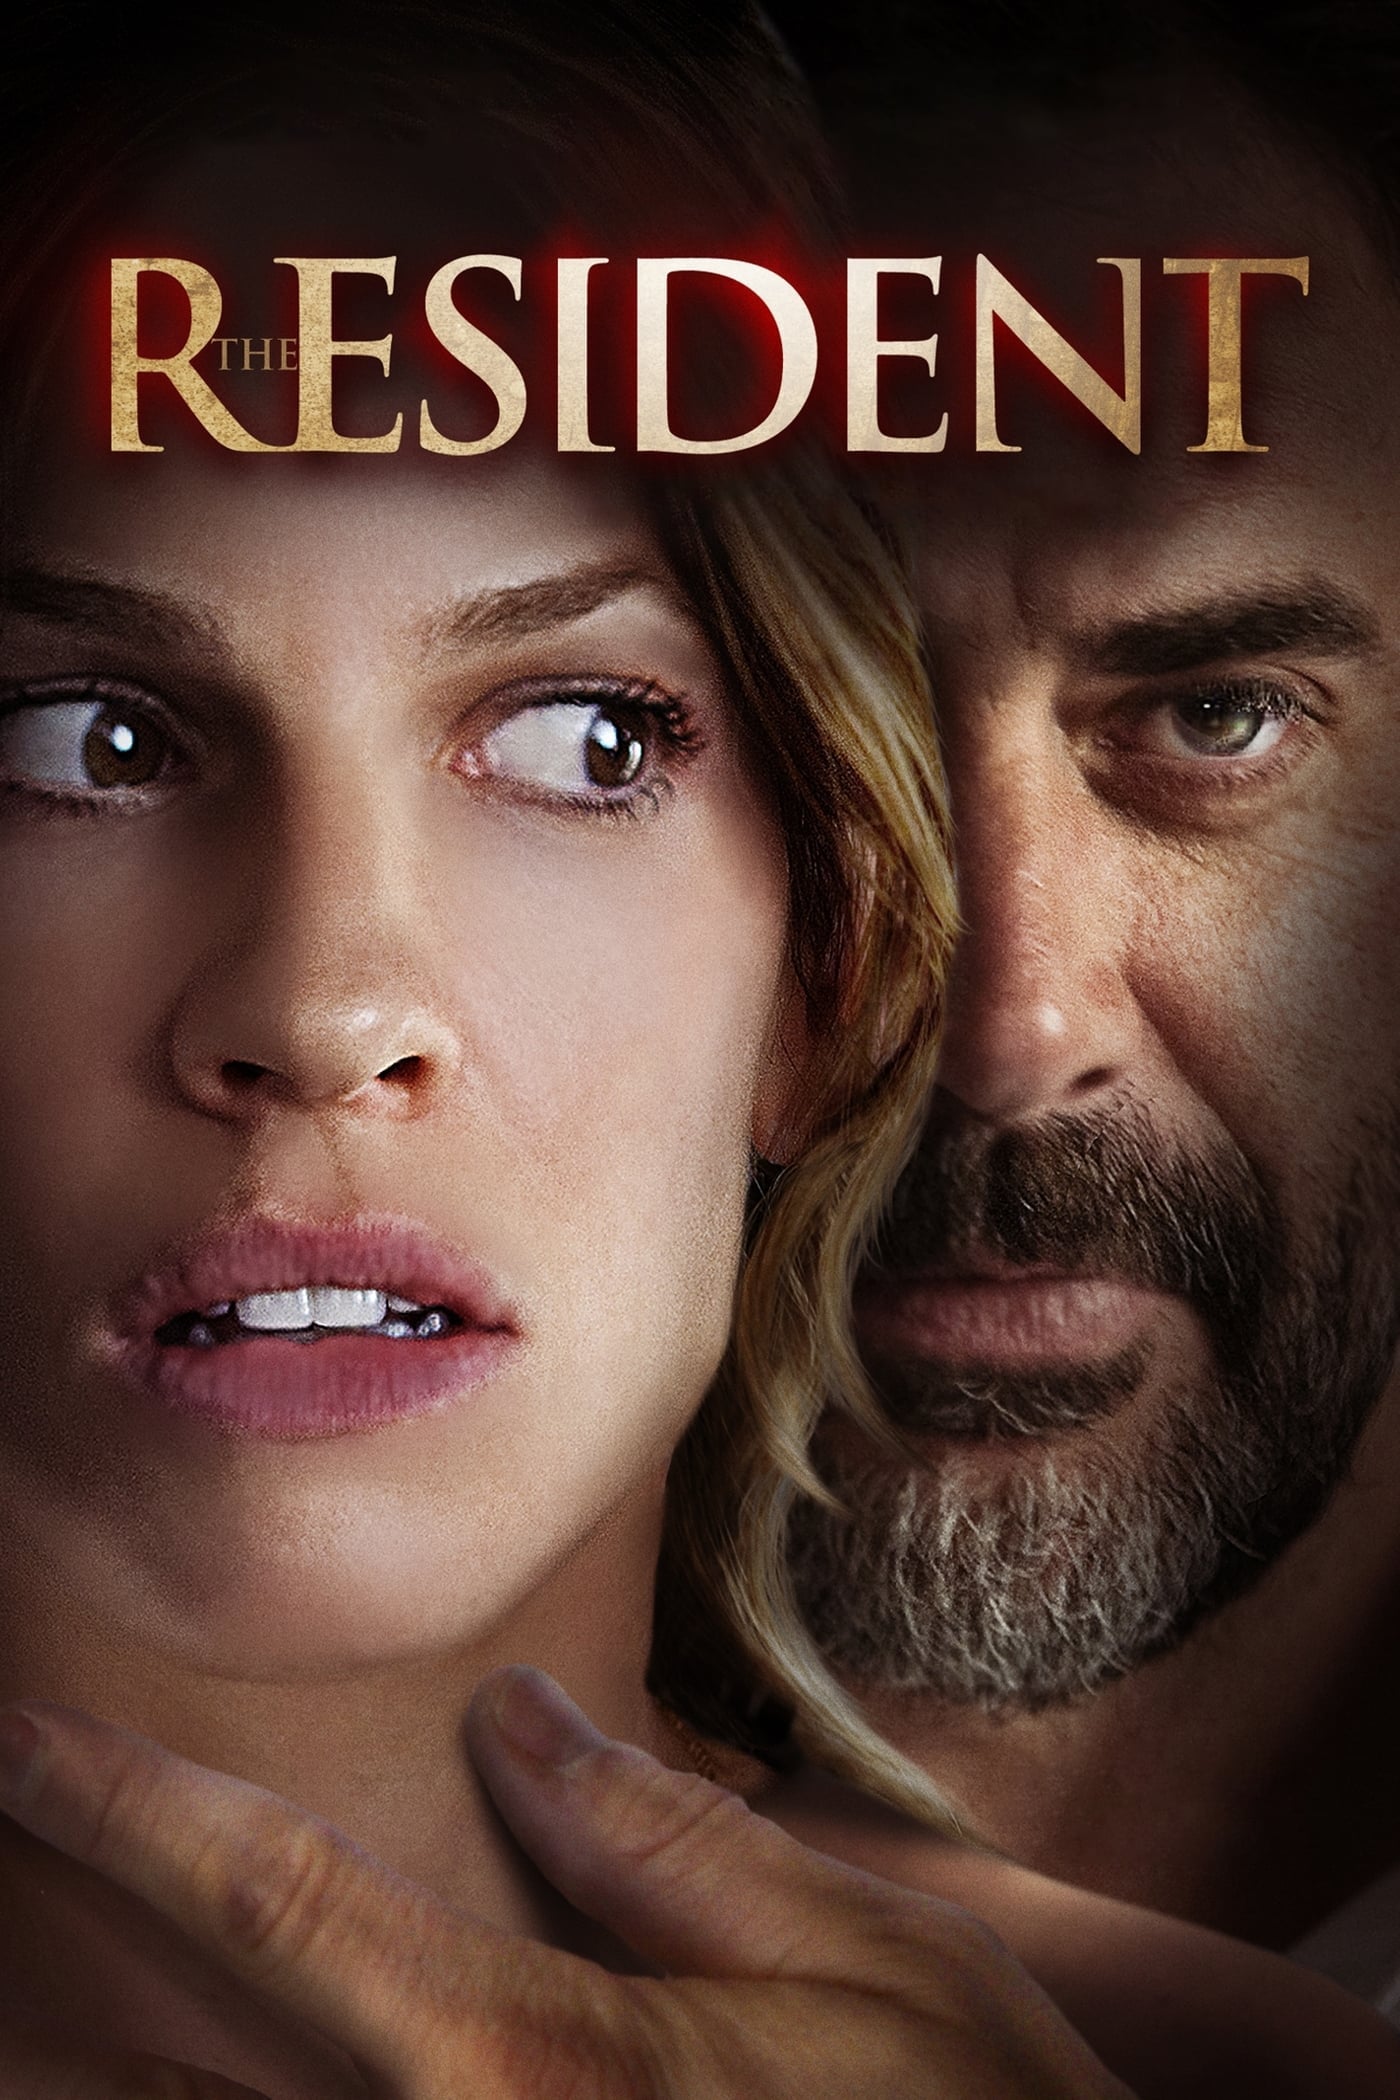 The Resident (2011)